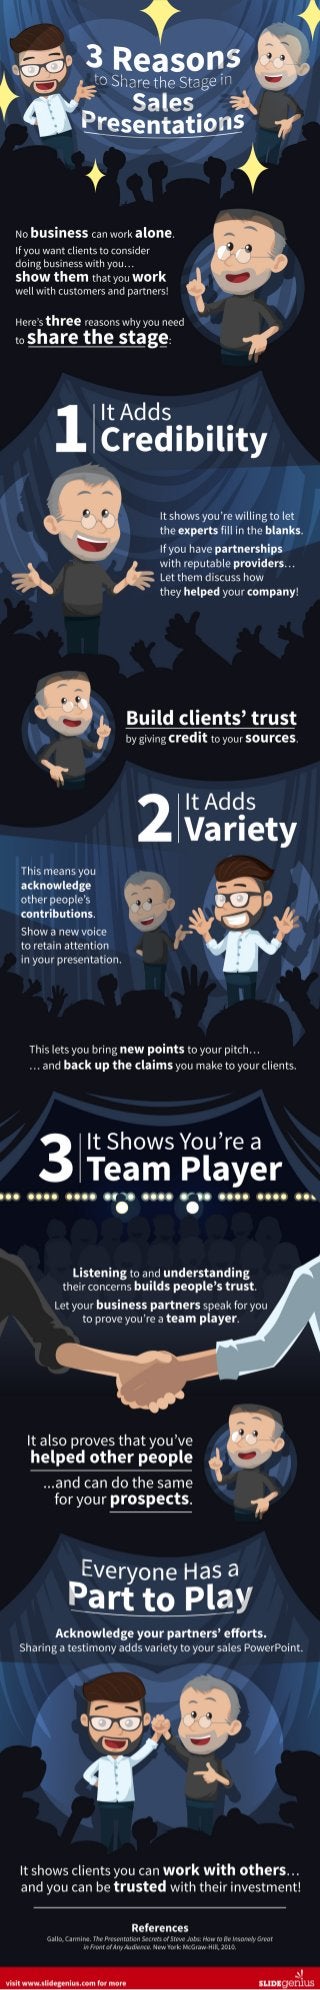 3 Reasons to Share the Stage in Sales Presentations